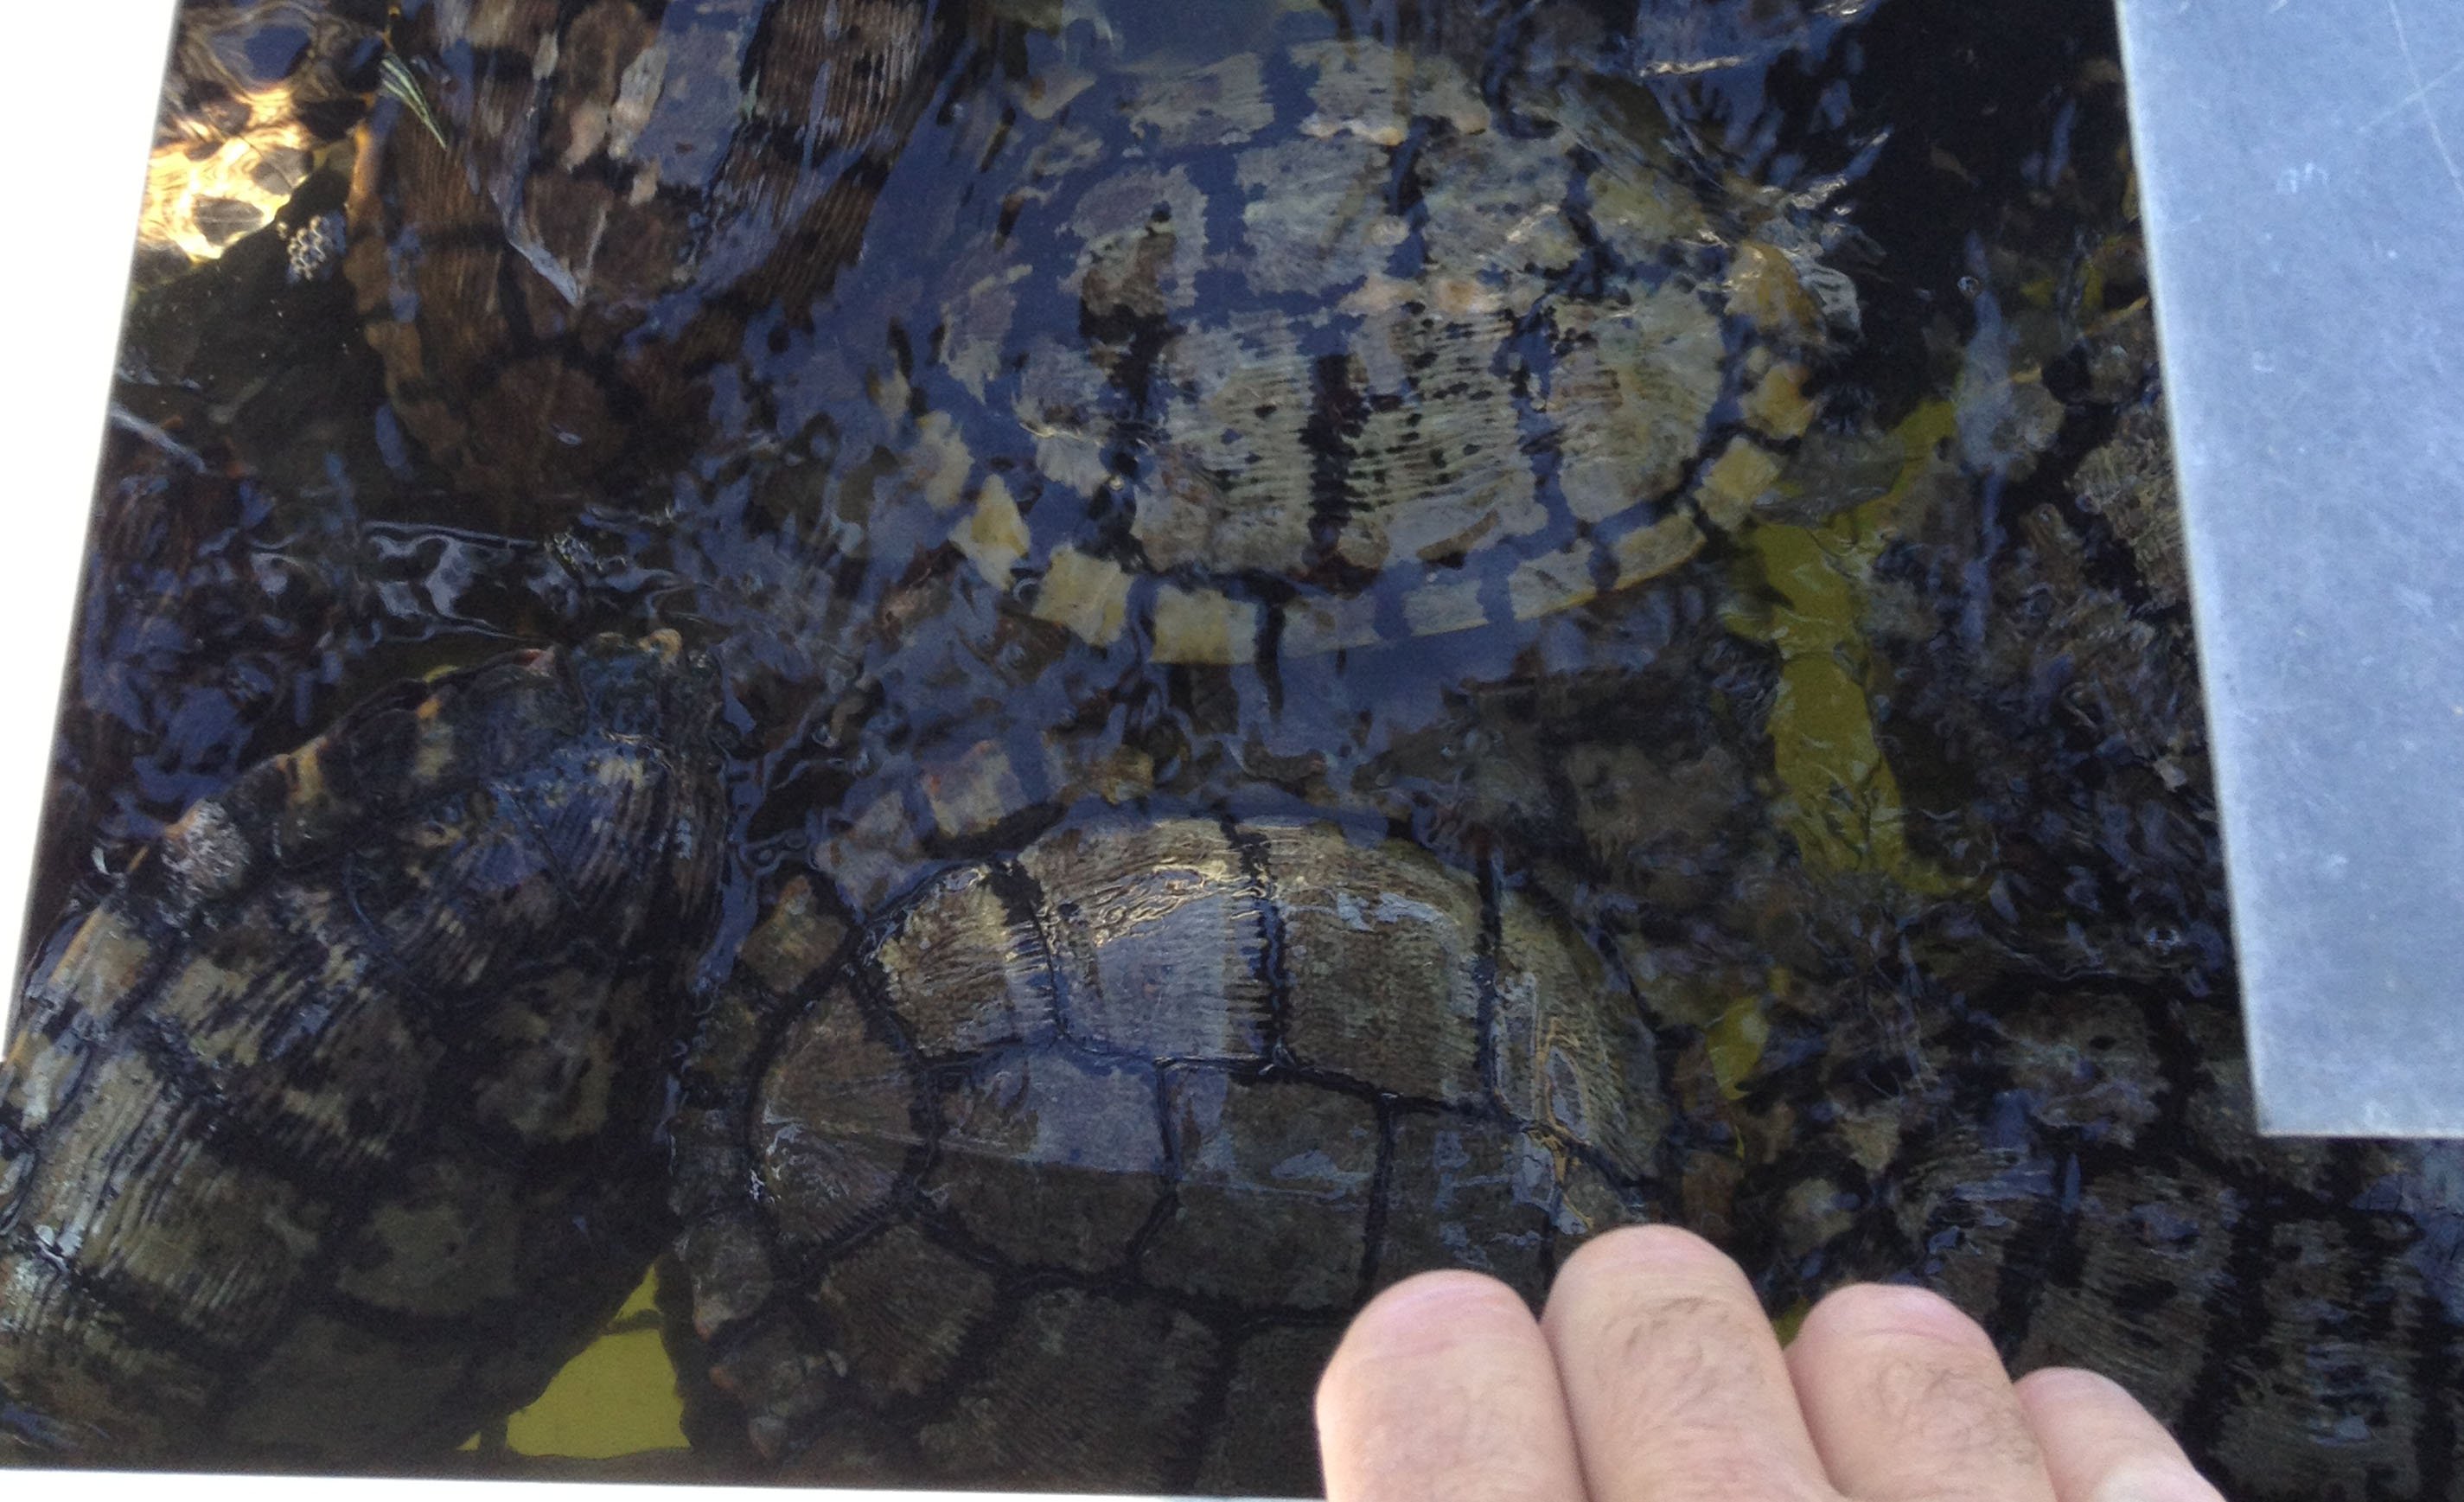 How to control turtles in your pond